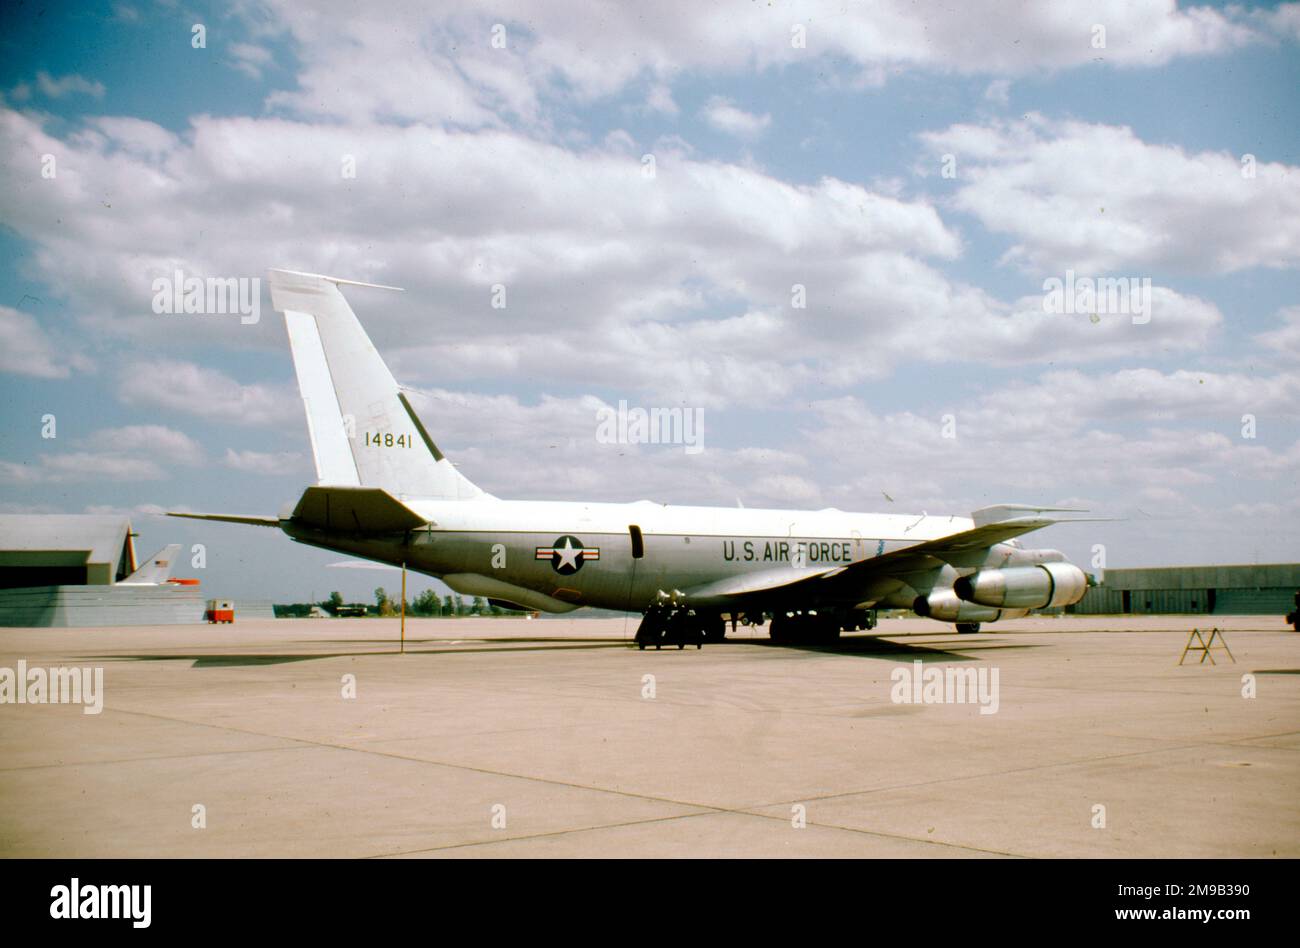 United States Air Force - Boeing RC-135C Big Team 64-14841 (msn 18781) Stock Photo